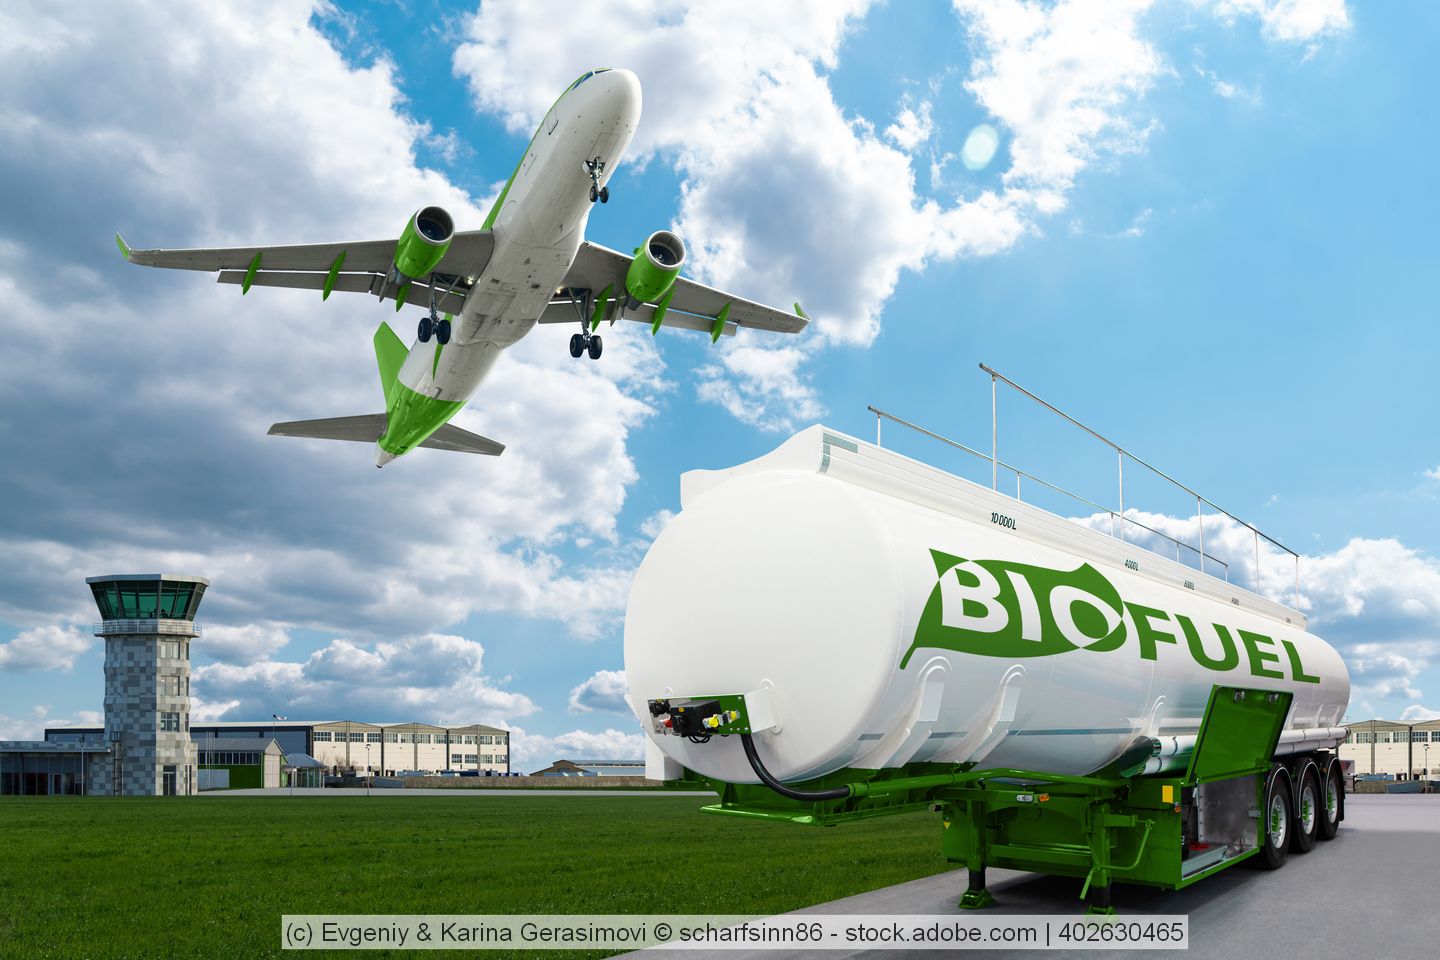 EA tank of biofuel stands at an airport and airplane flies above